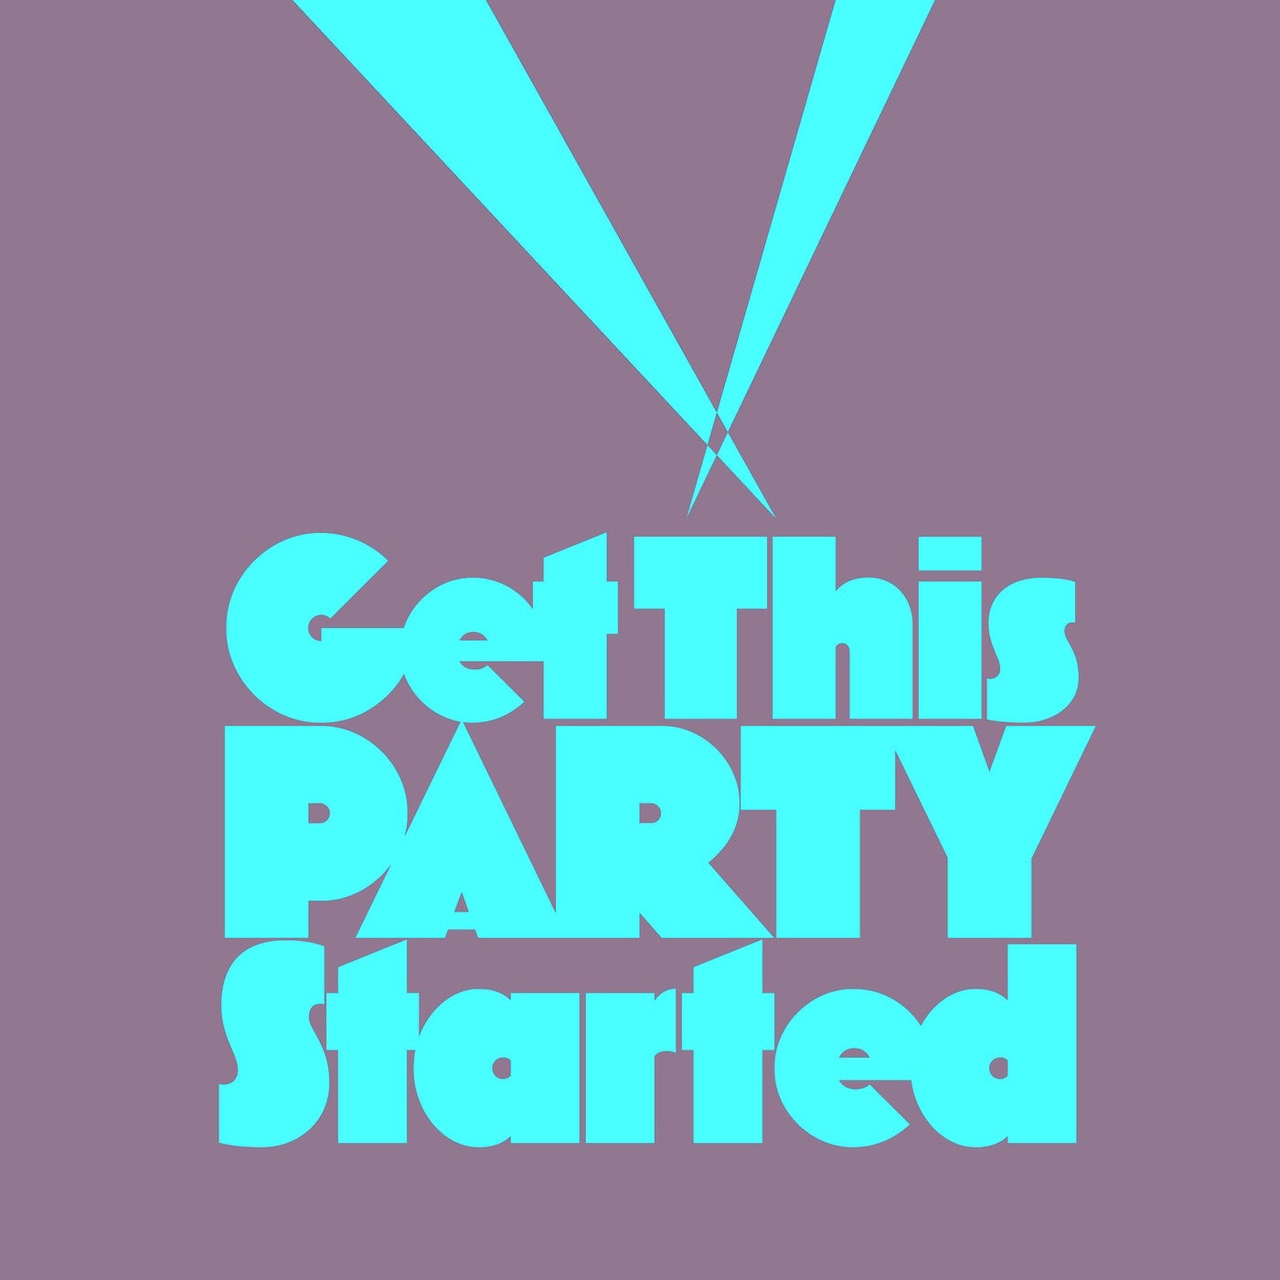 Westend Get This Party Started cover artwork